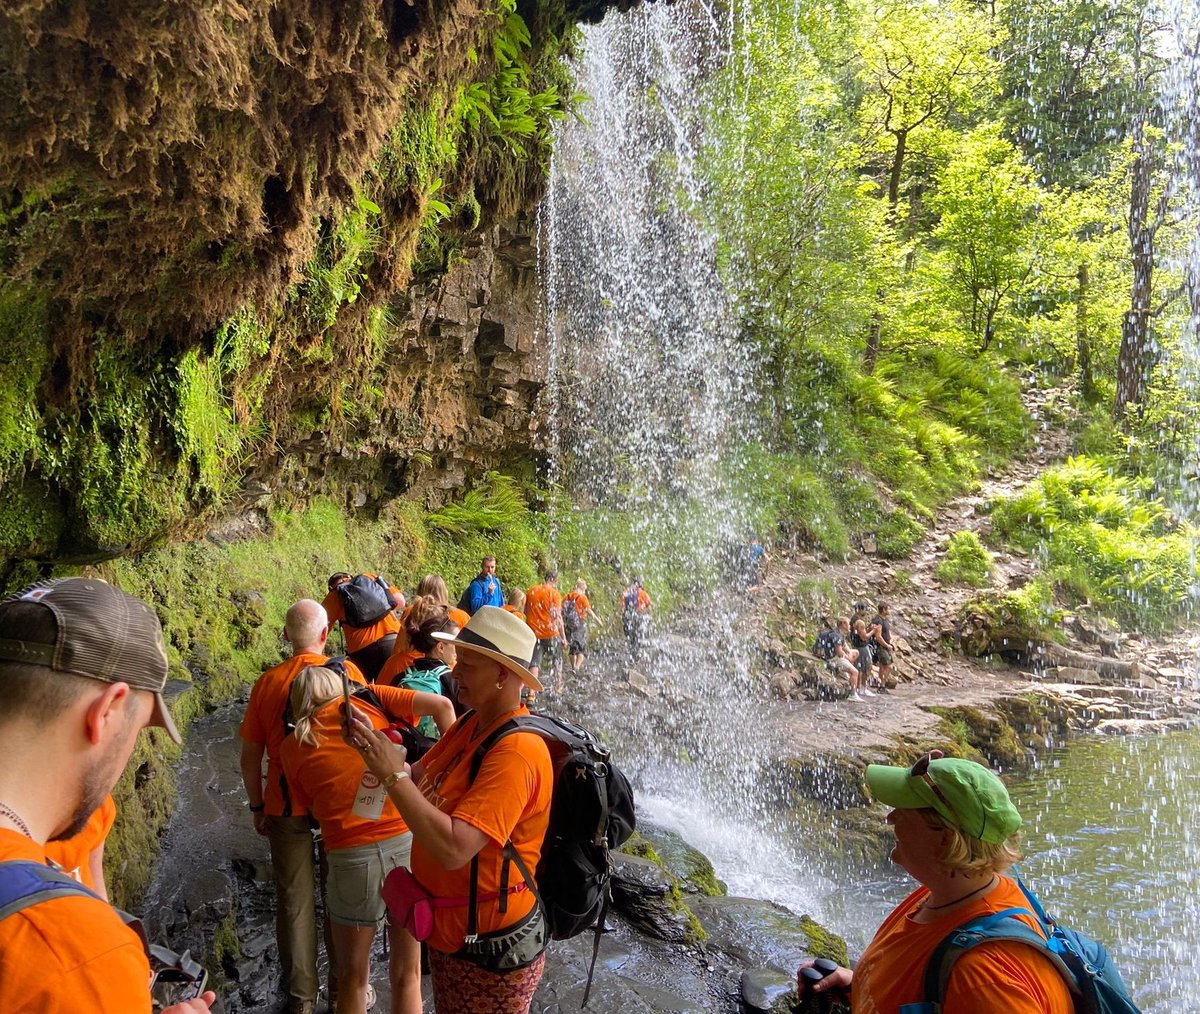 Join Team Pituitary for our spectacular 4 Falls trek and help raise money for anyone affected by pituitary conditions 🤩 👉️Find out more and sign up on our website: pituitary.org.uk/event/four-fal…